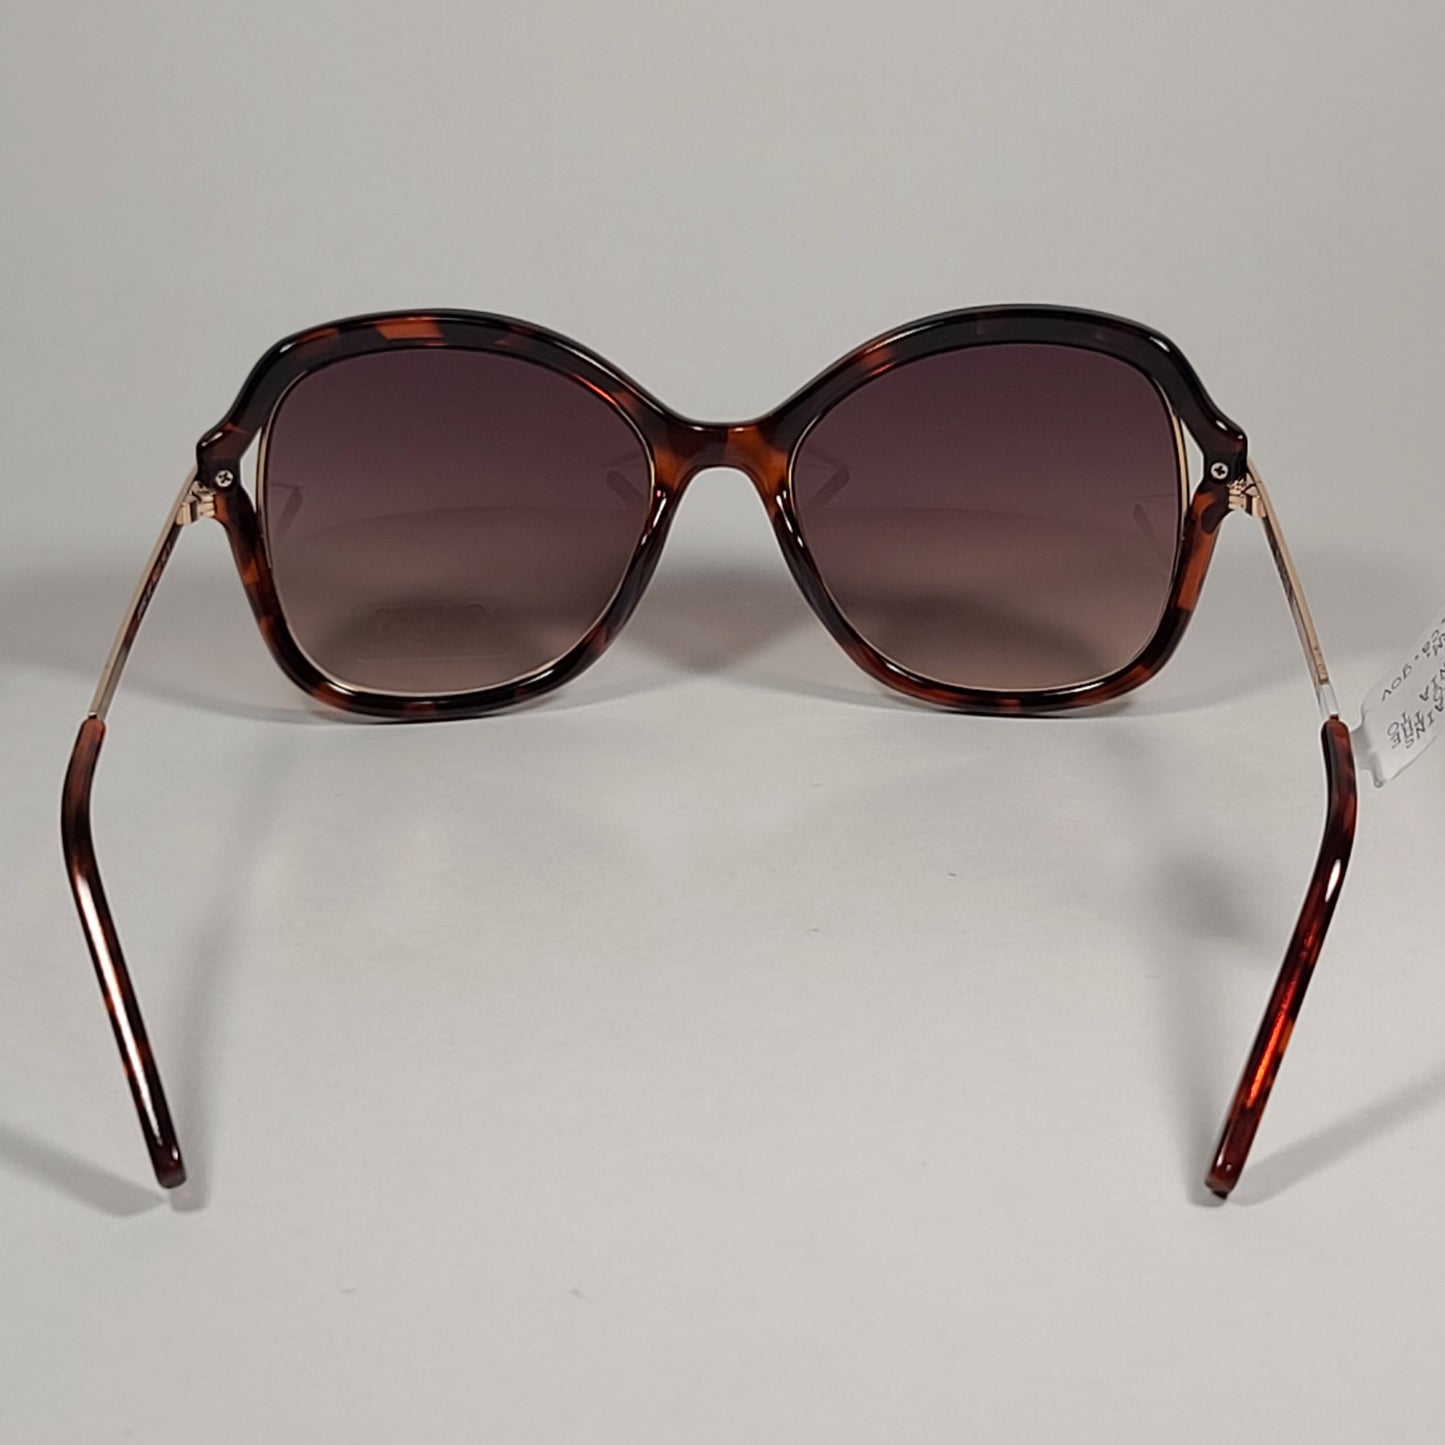 Guess Butterfly Sunglasses Shiny Brown Tortoise Gold Brown Gradient GF0352 52F - Sunglasses